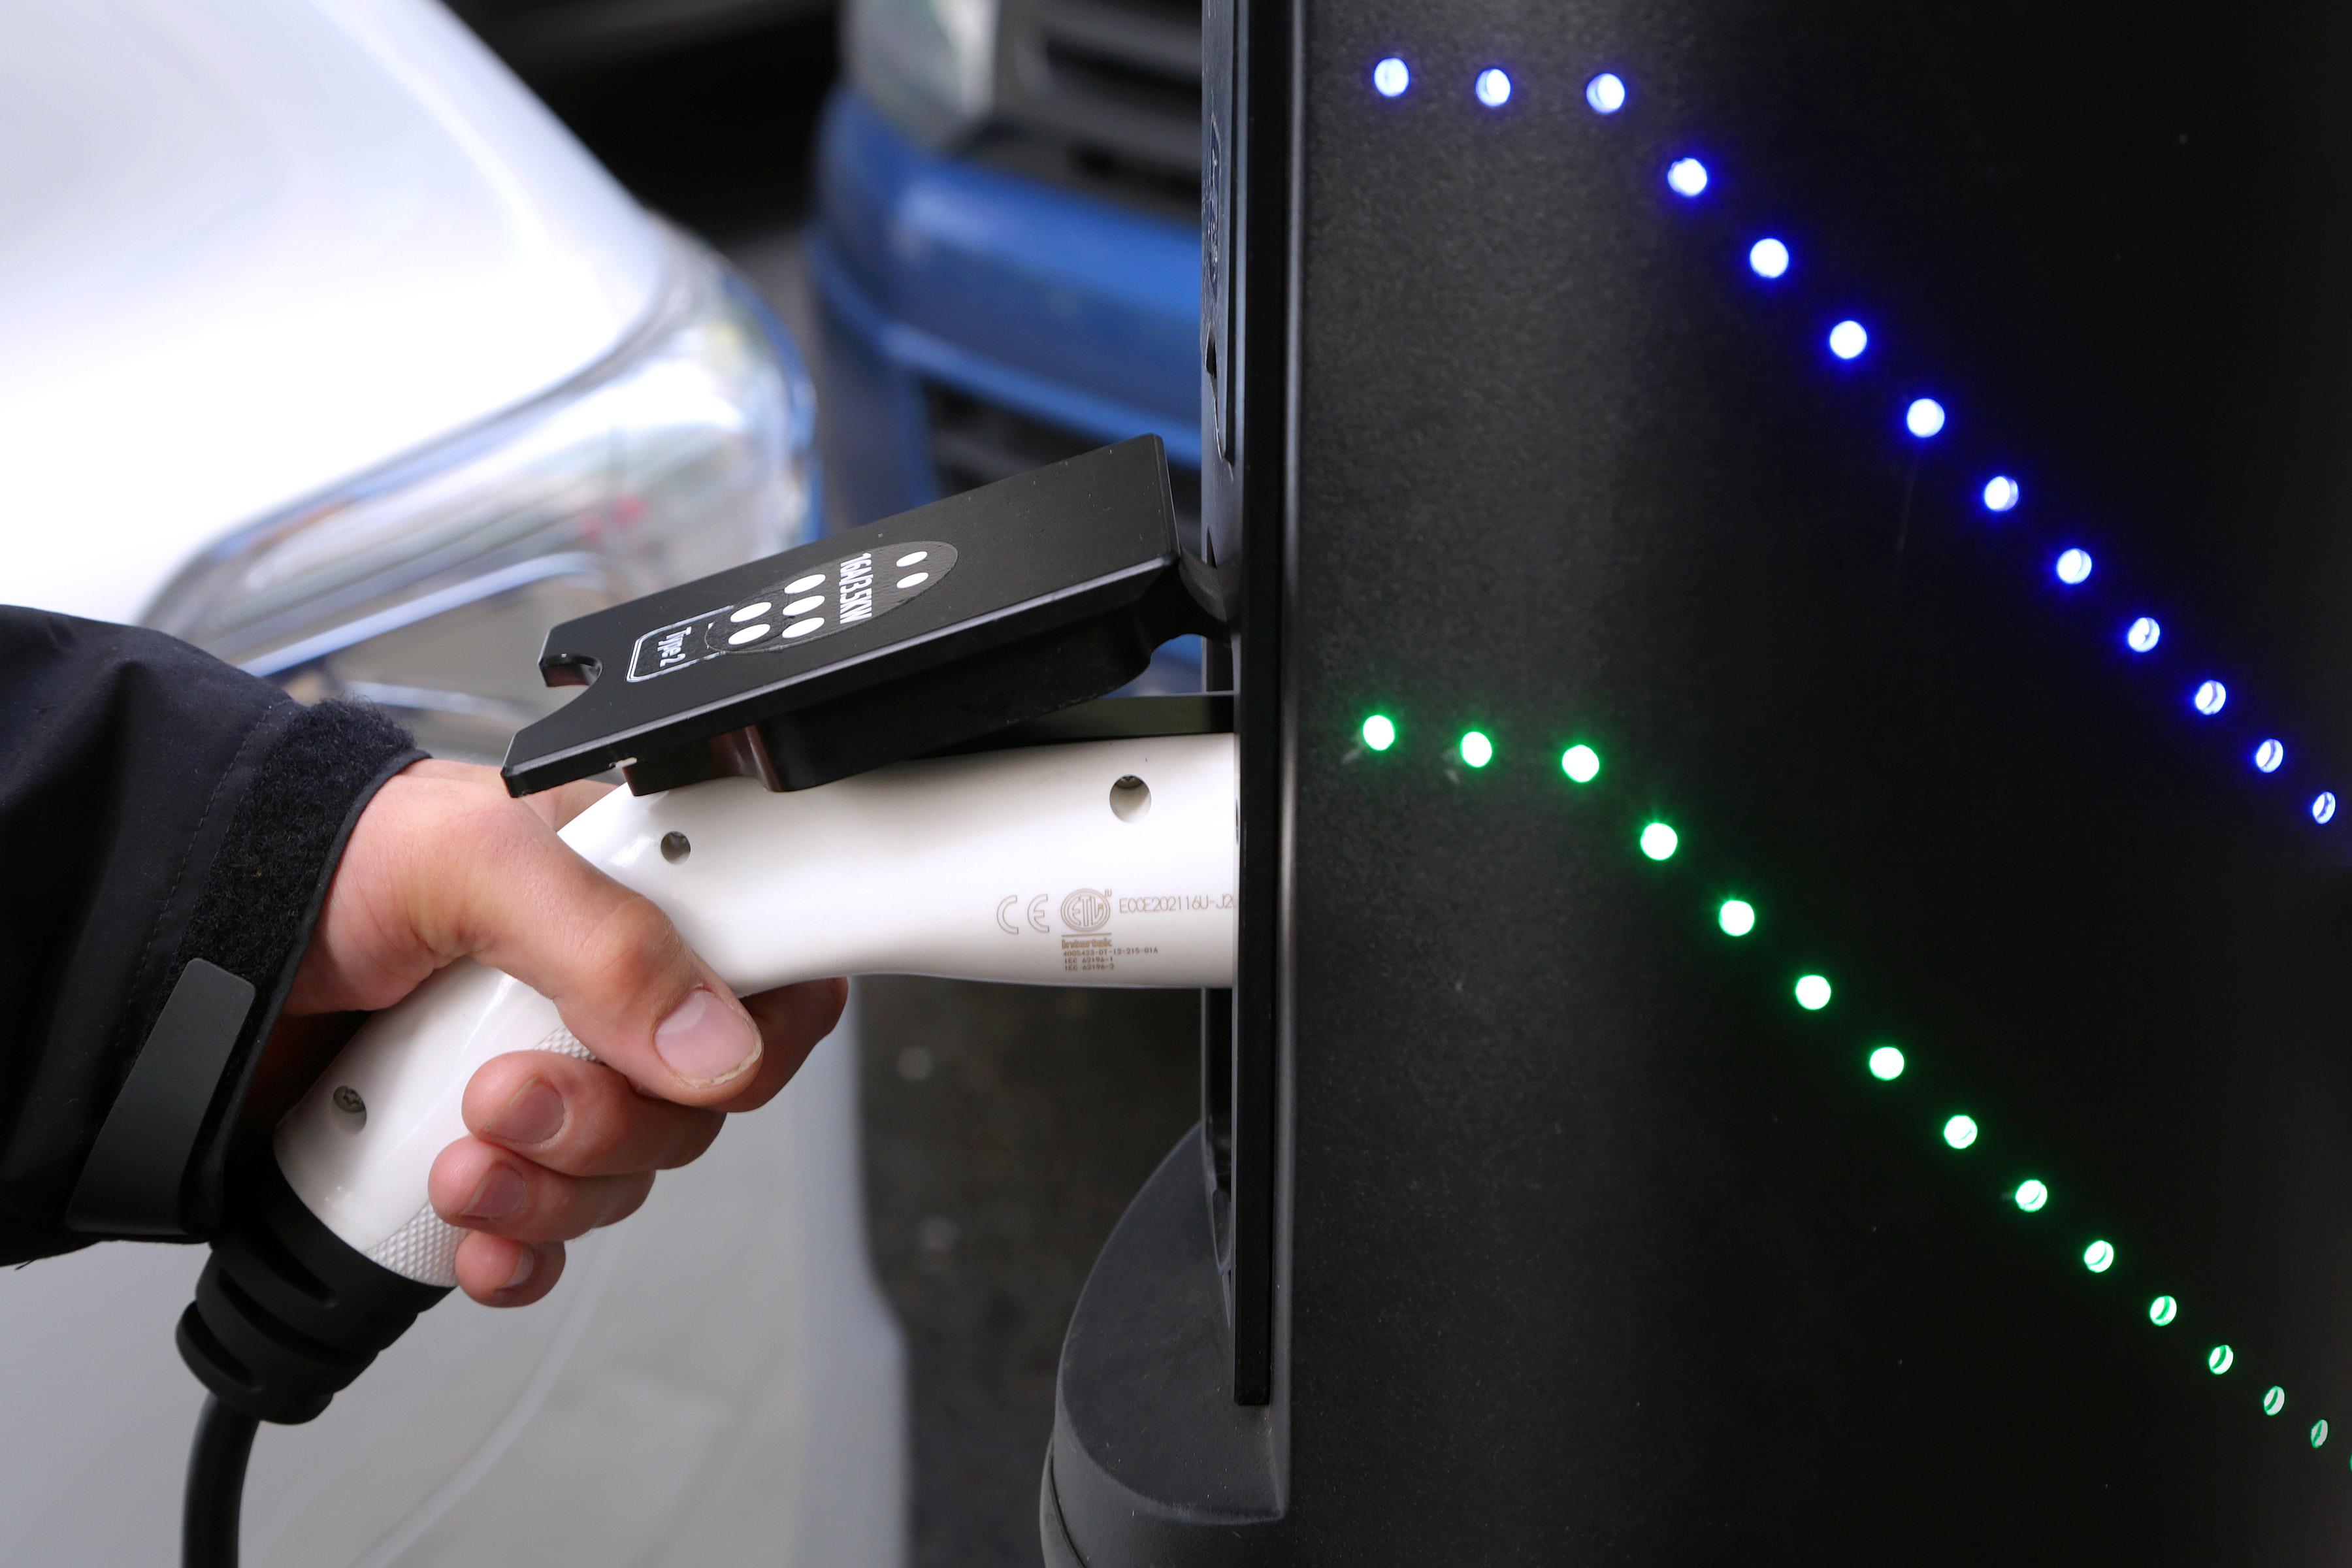 Chargemaster amps up customer service with longer opening hours